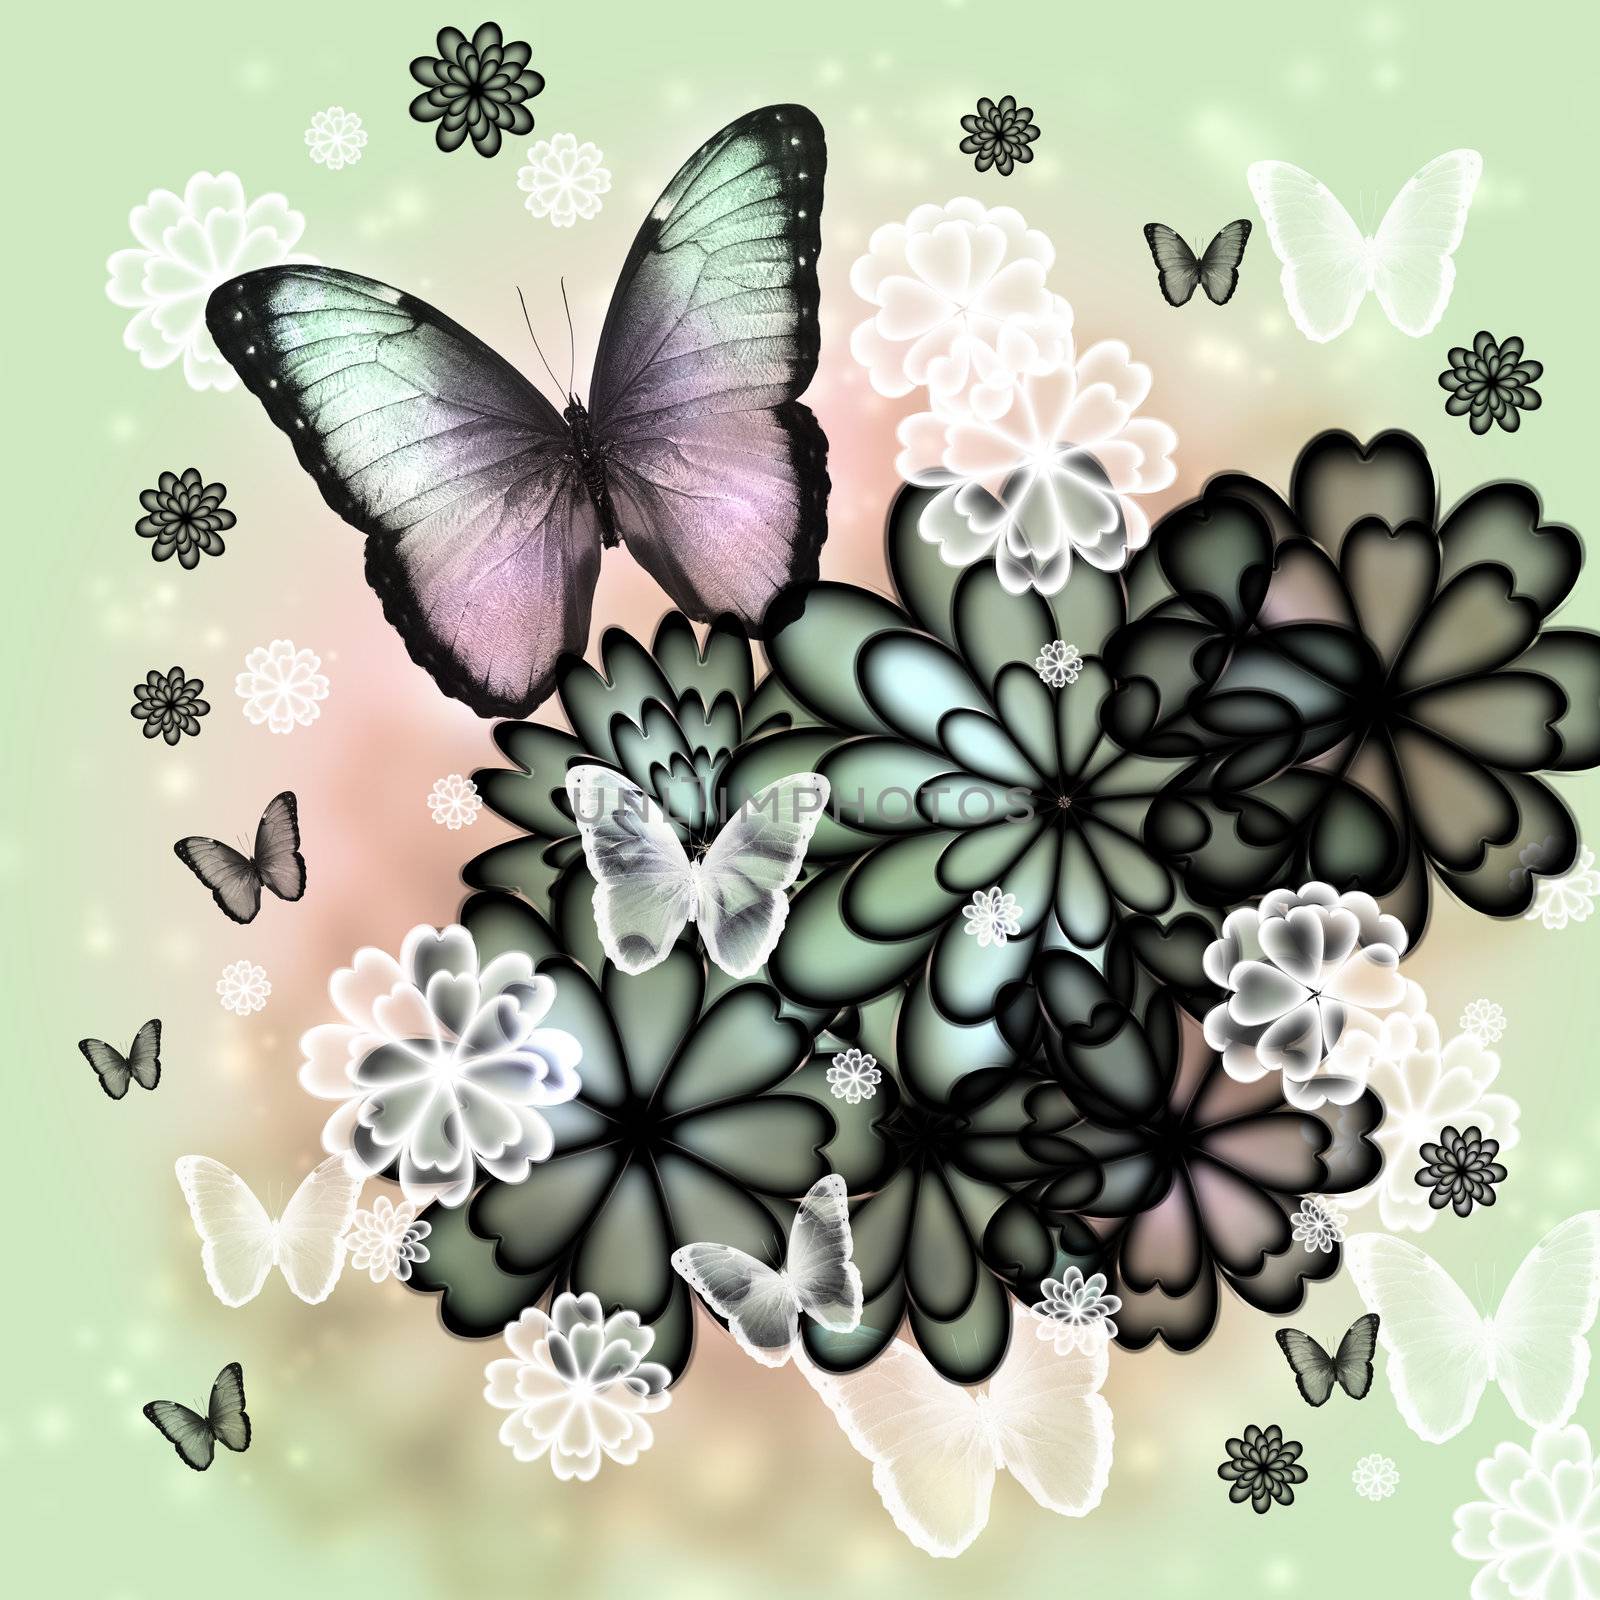 Butterflies and blossoms tinted illustration (pink and green)